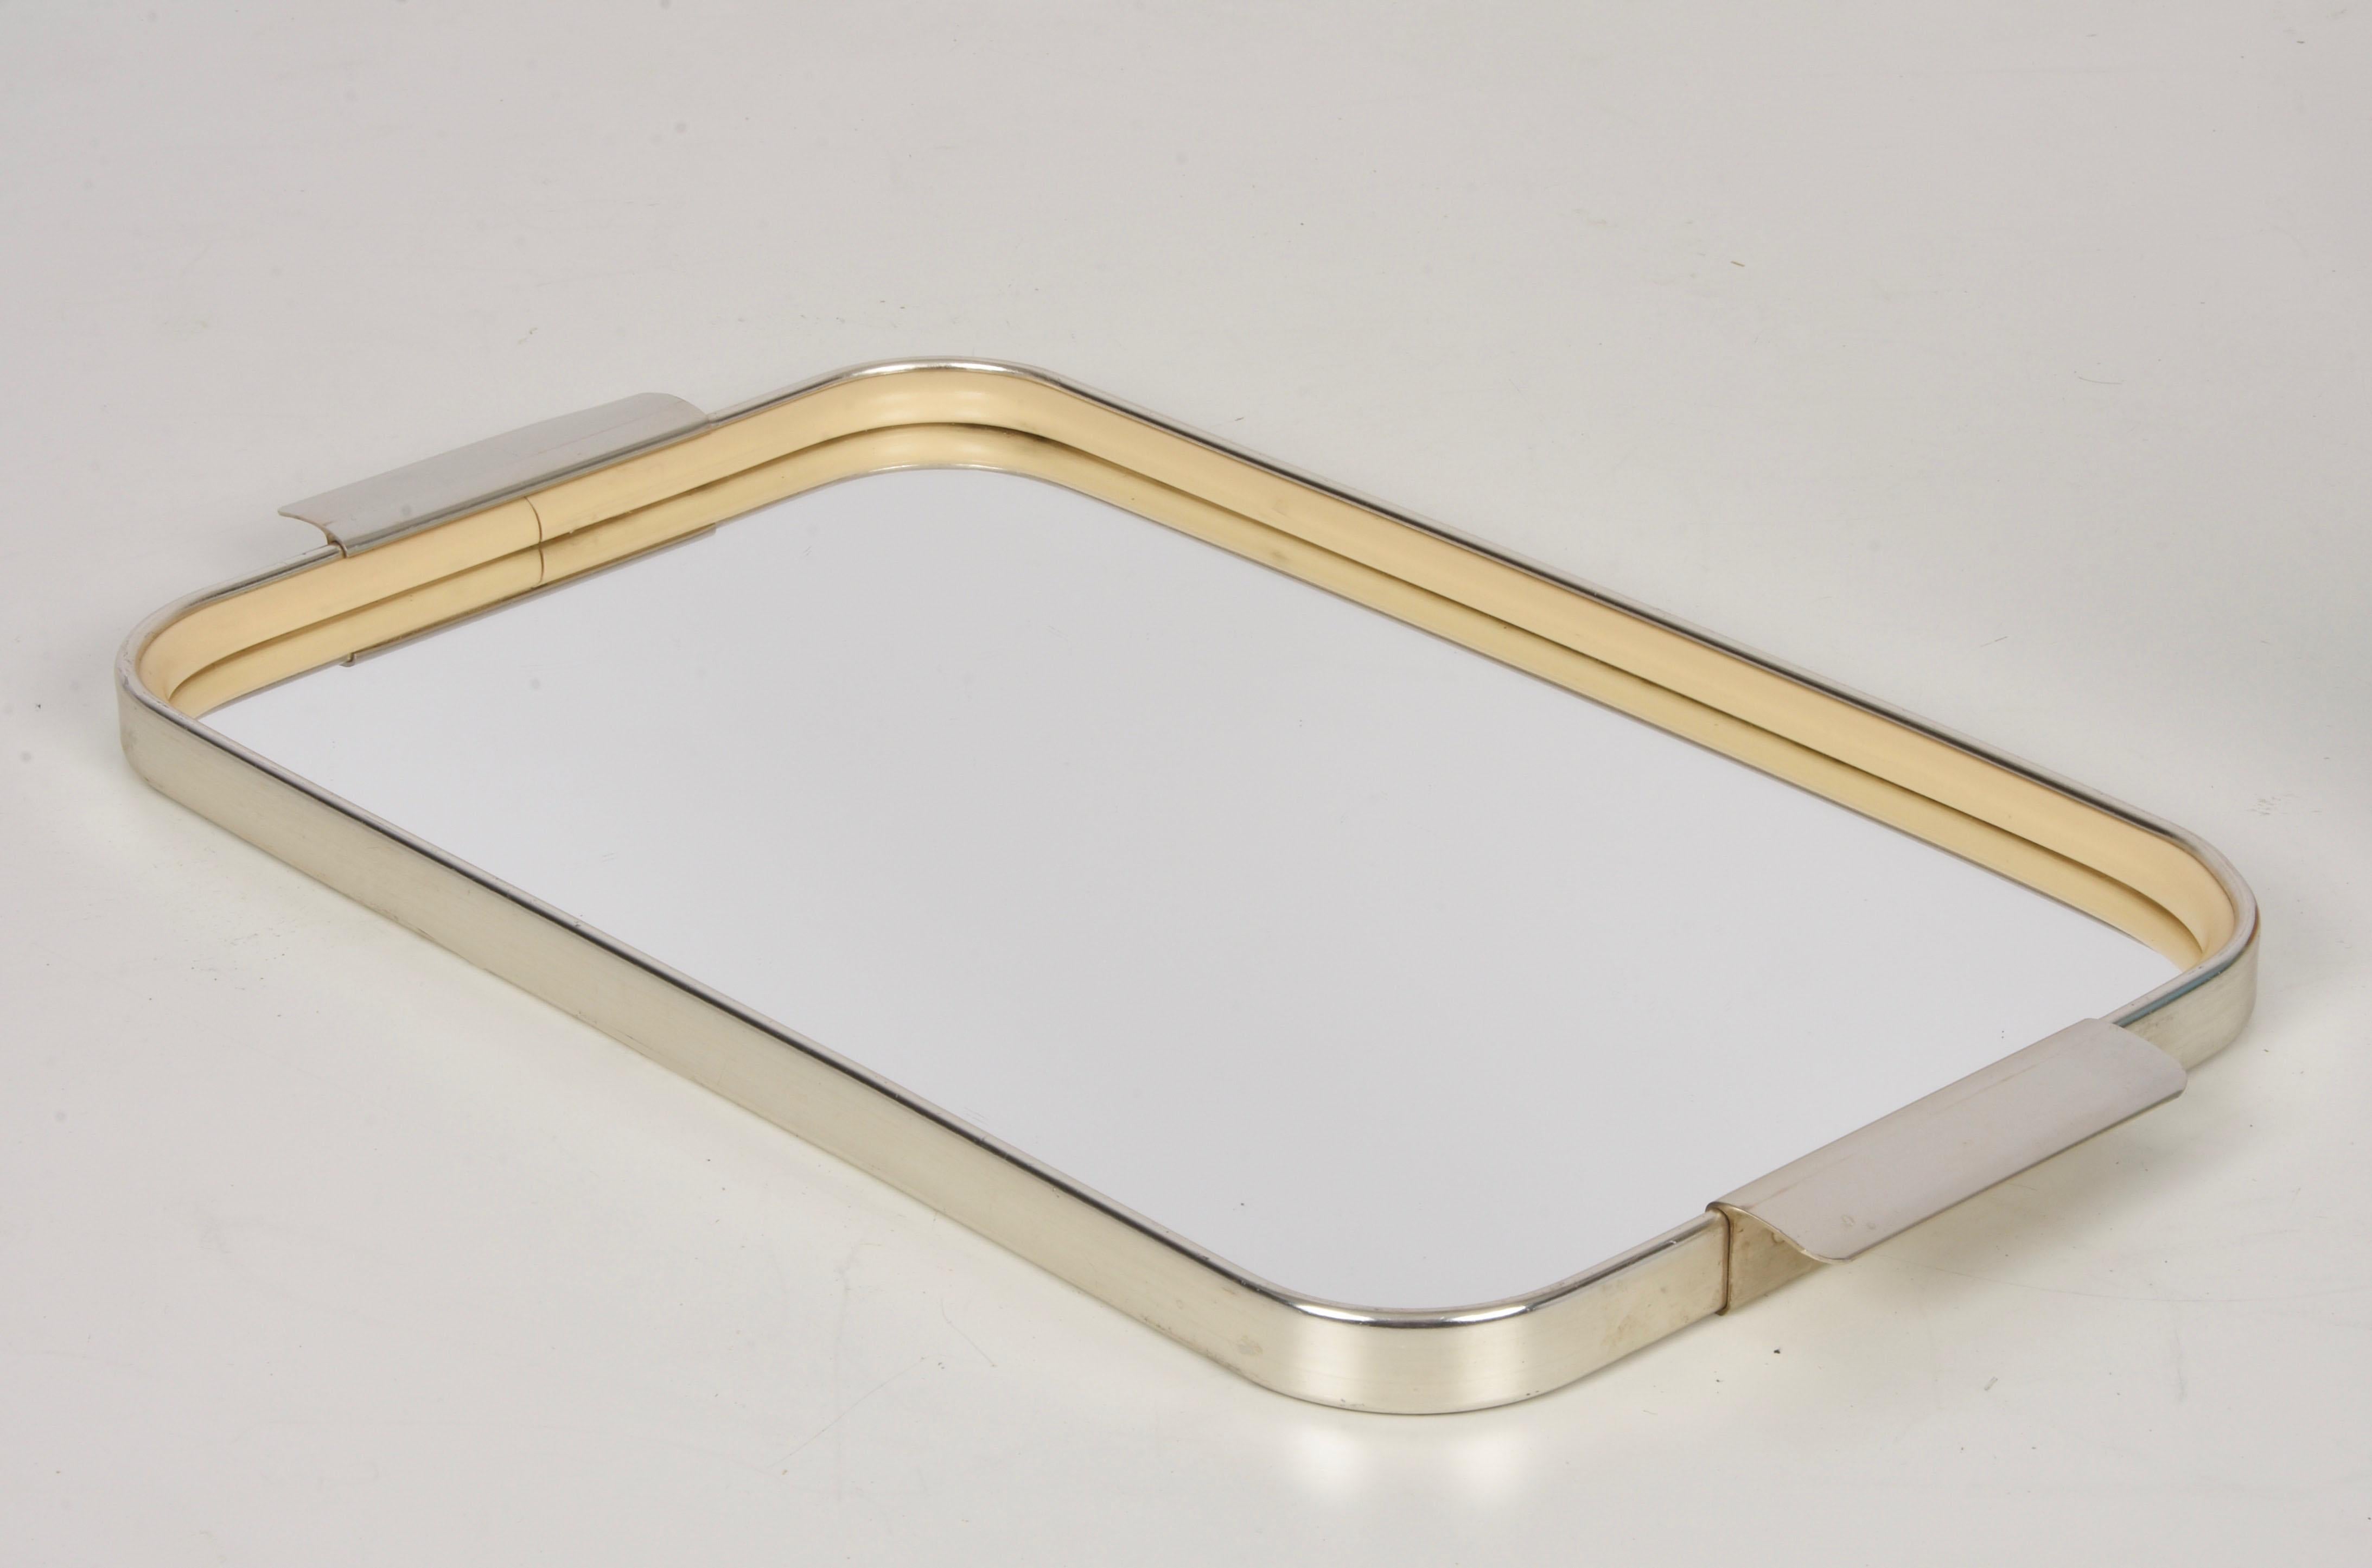 Elegant midcentury aluminium serving tray with mirror top. This astonishing piece of barware was designed by Carlo Scarpa in Italy during the 1960s.

This item is amazing because of the perfect fusion of the materials: gilt anodized aluminium, top